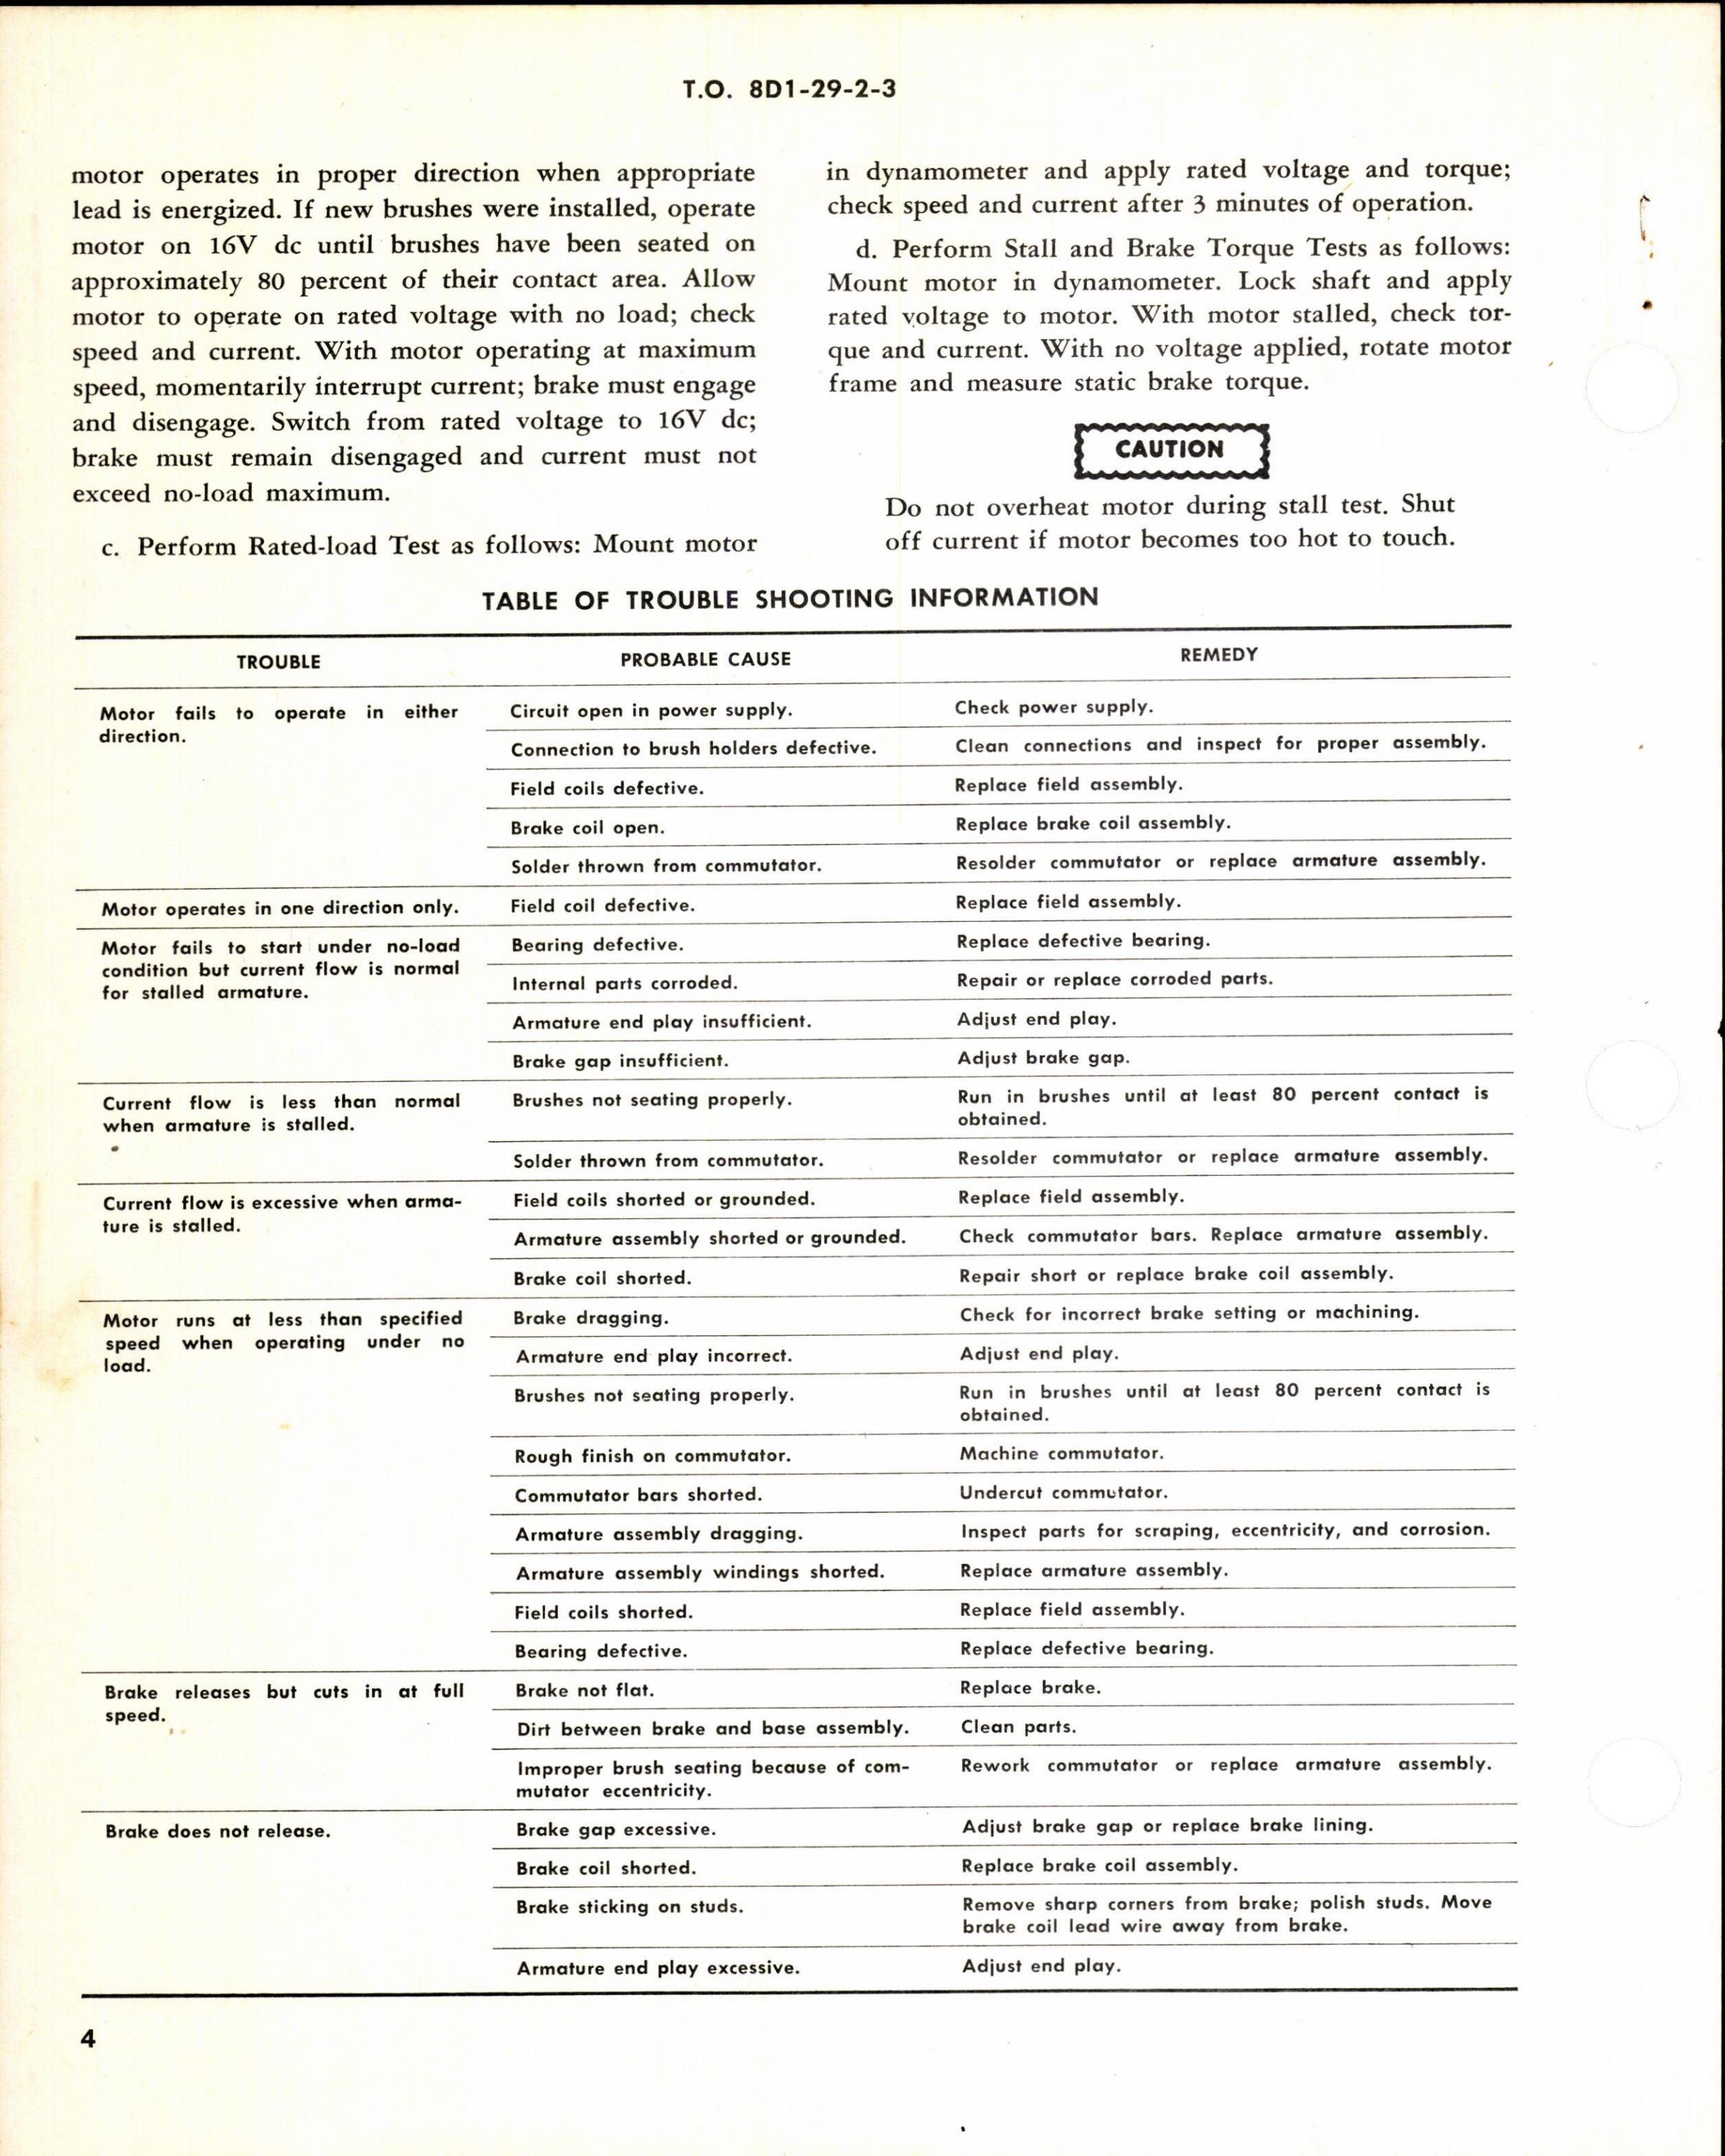 Sample page 4 from AirCorps Library document: Overhaul Instructions with Parts Breakdown for Direct Current Motor Model DCM15-52, Part No 26976